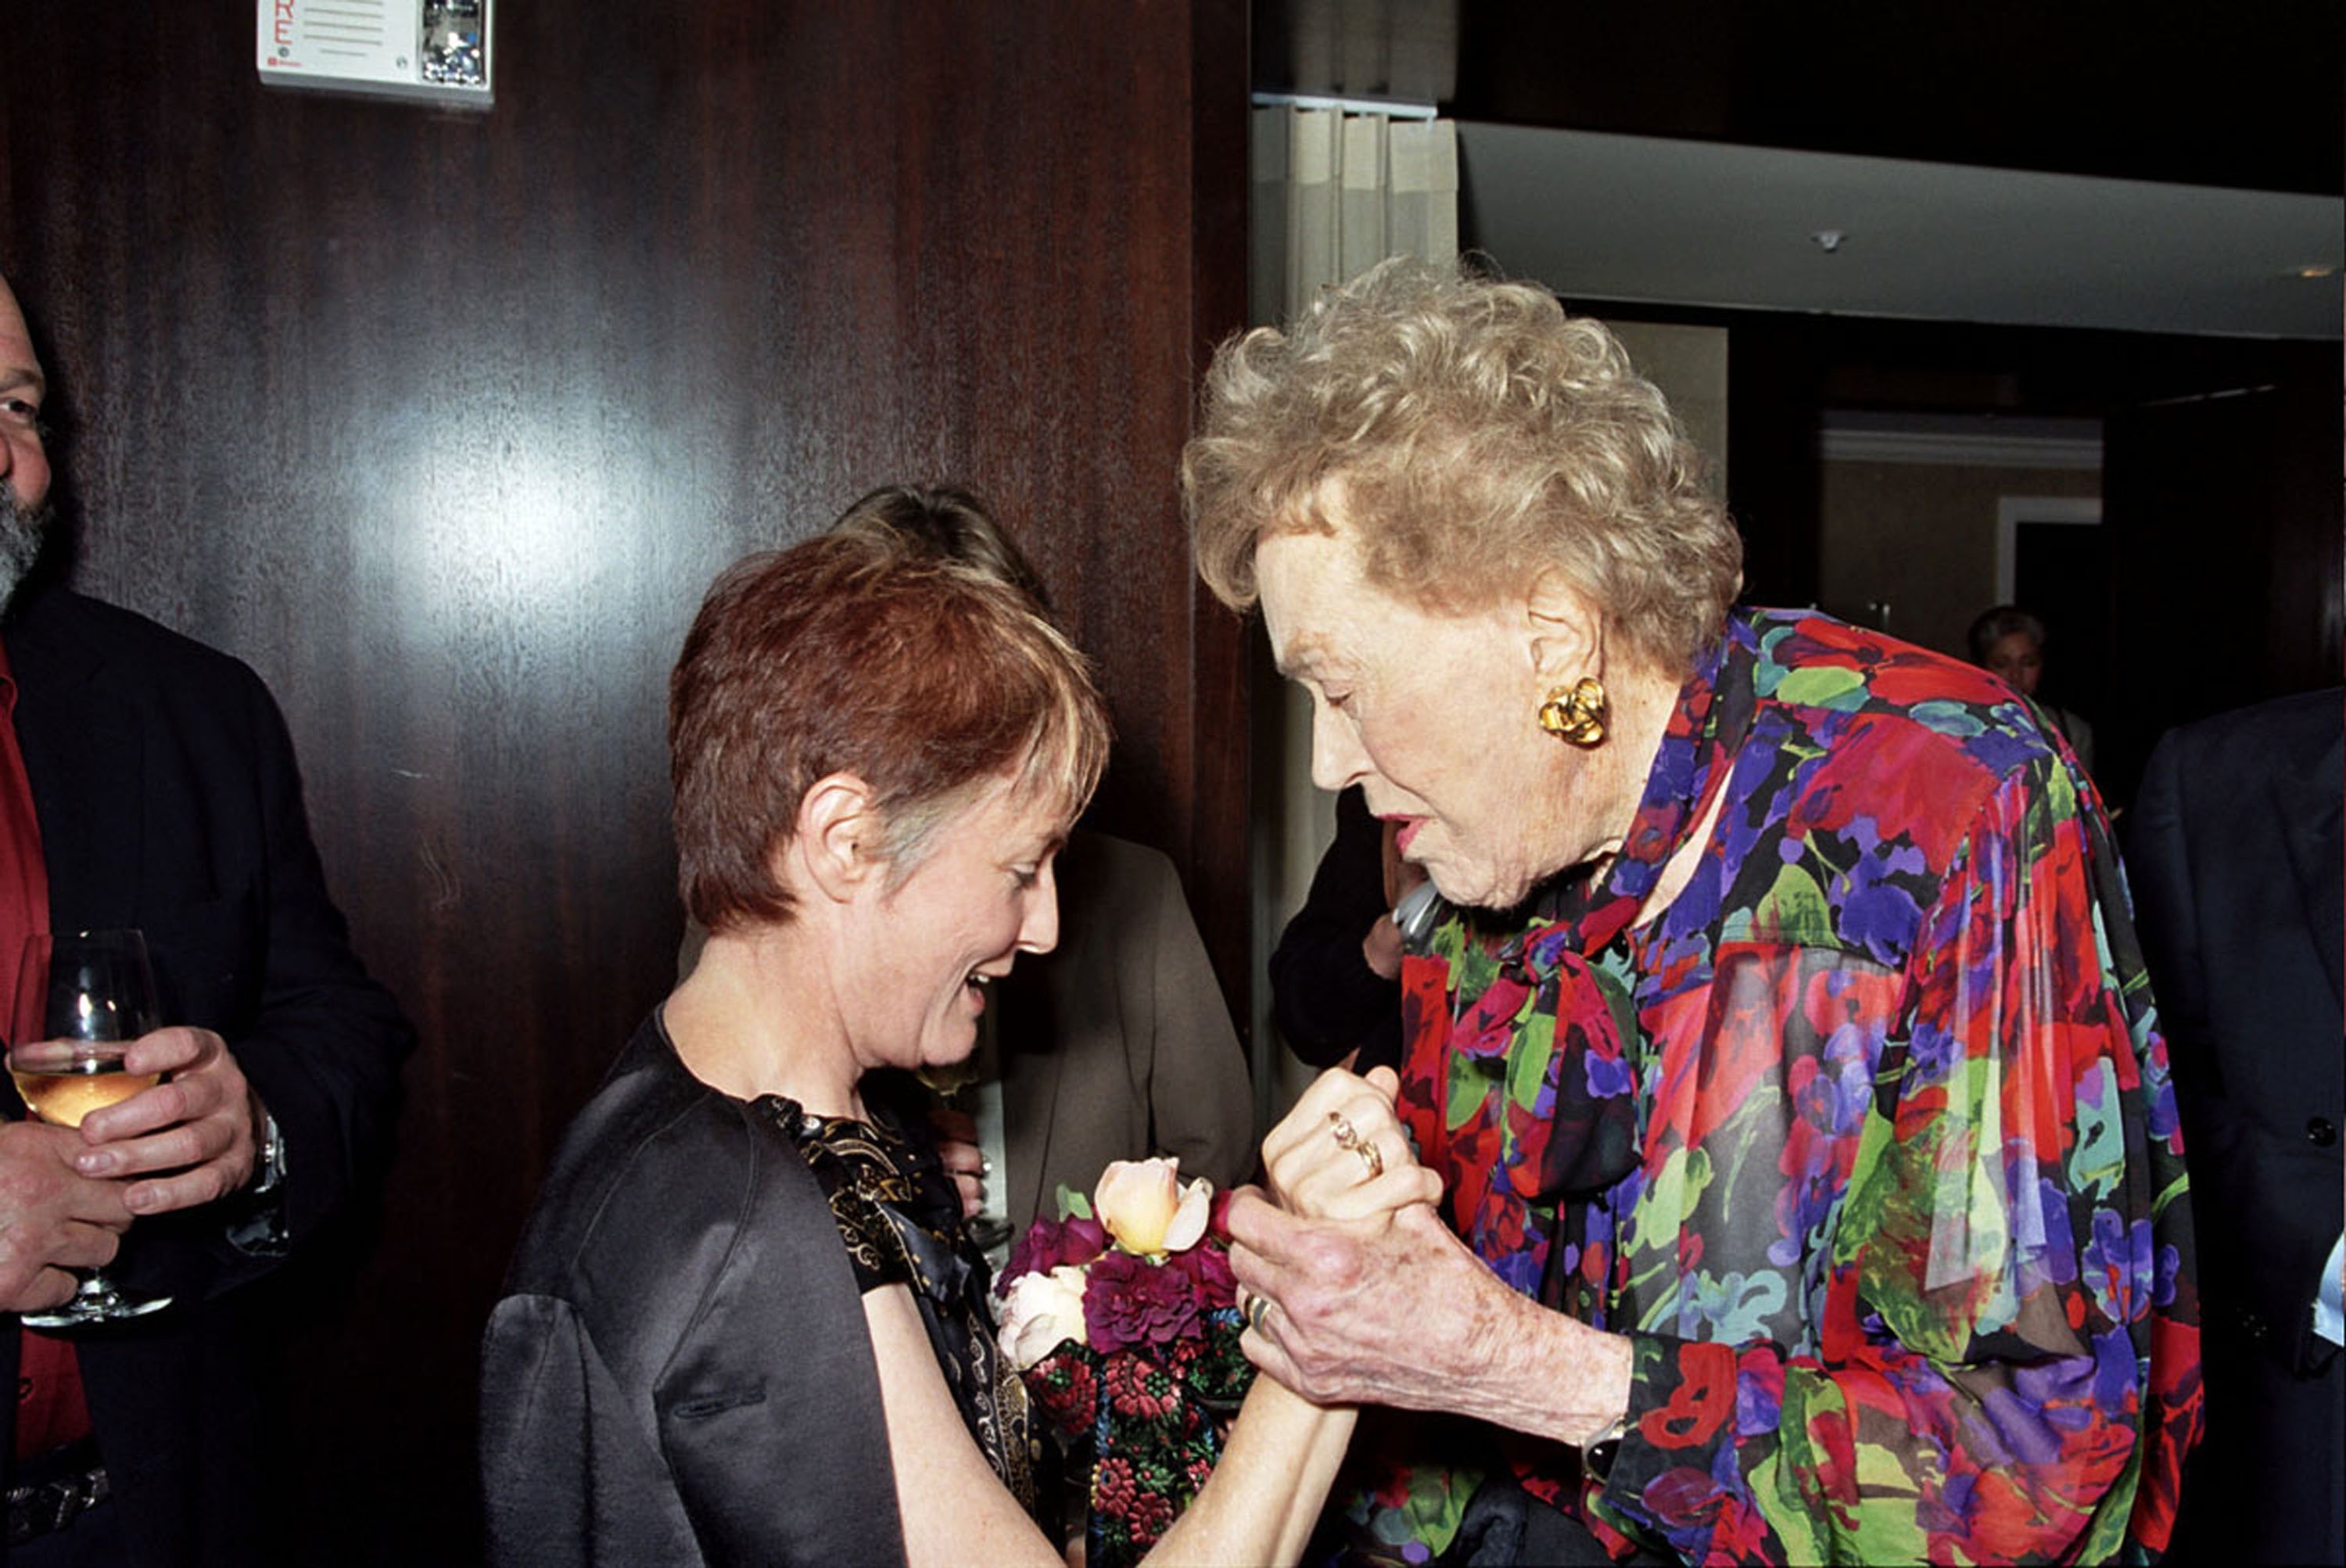 Alice Waters of Chez Panisse gives chef Julia Child a bouquet of roses from her garden during a charity pre-birthday dinner at the Fifth Floor restaurant on August 1, 2002 in San Francisco, California. Photo: Getty Images